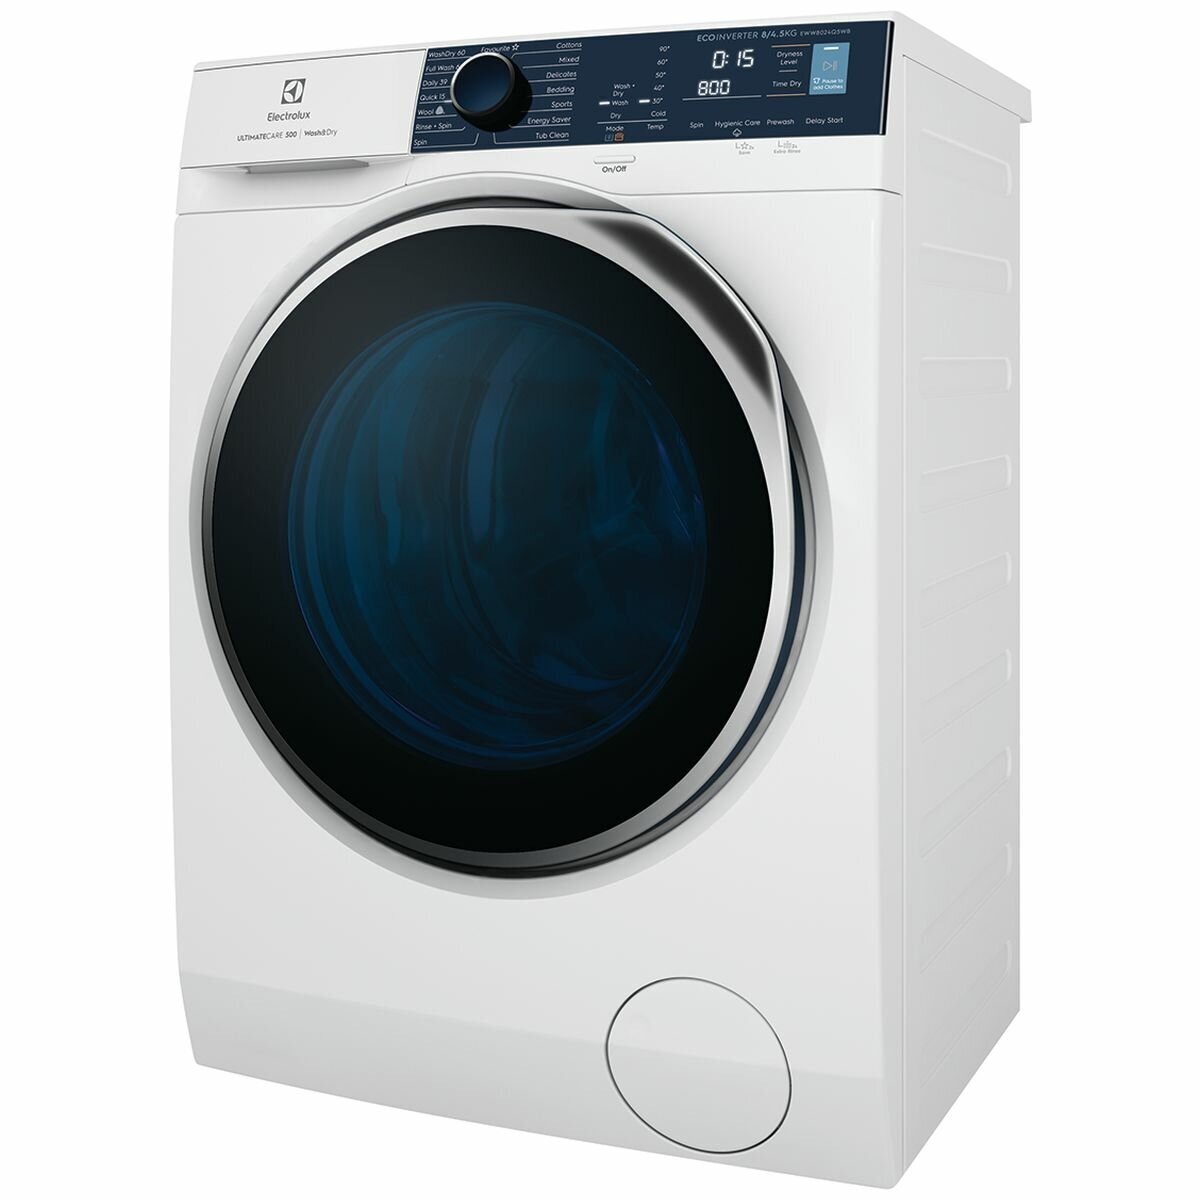 Electrolux 8kg/4.5kg Washer Dryer Combo EWW8024Q5WB